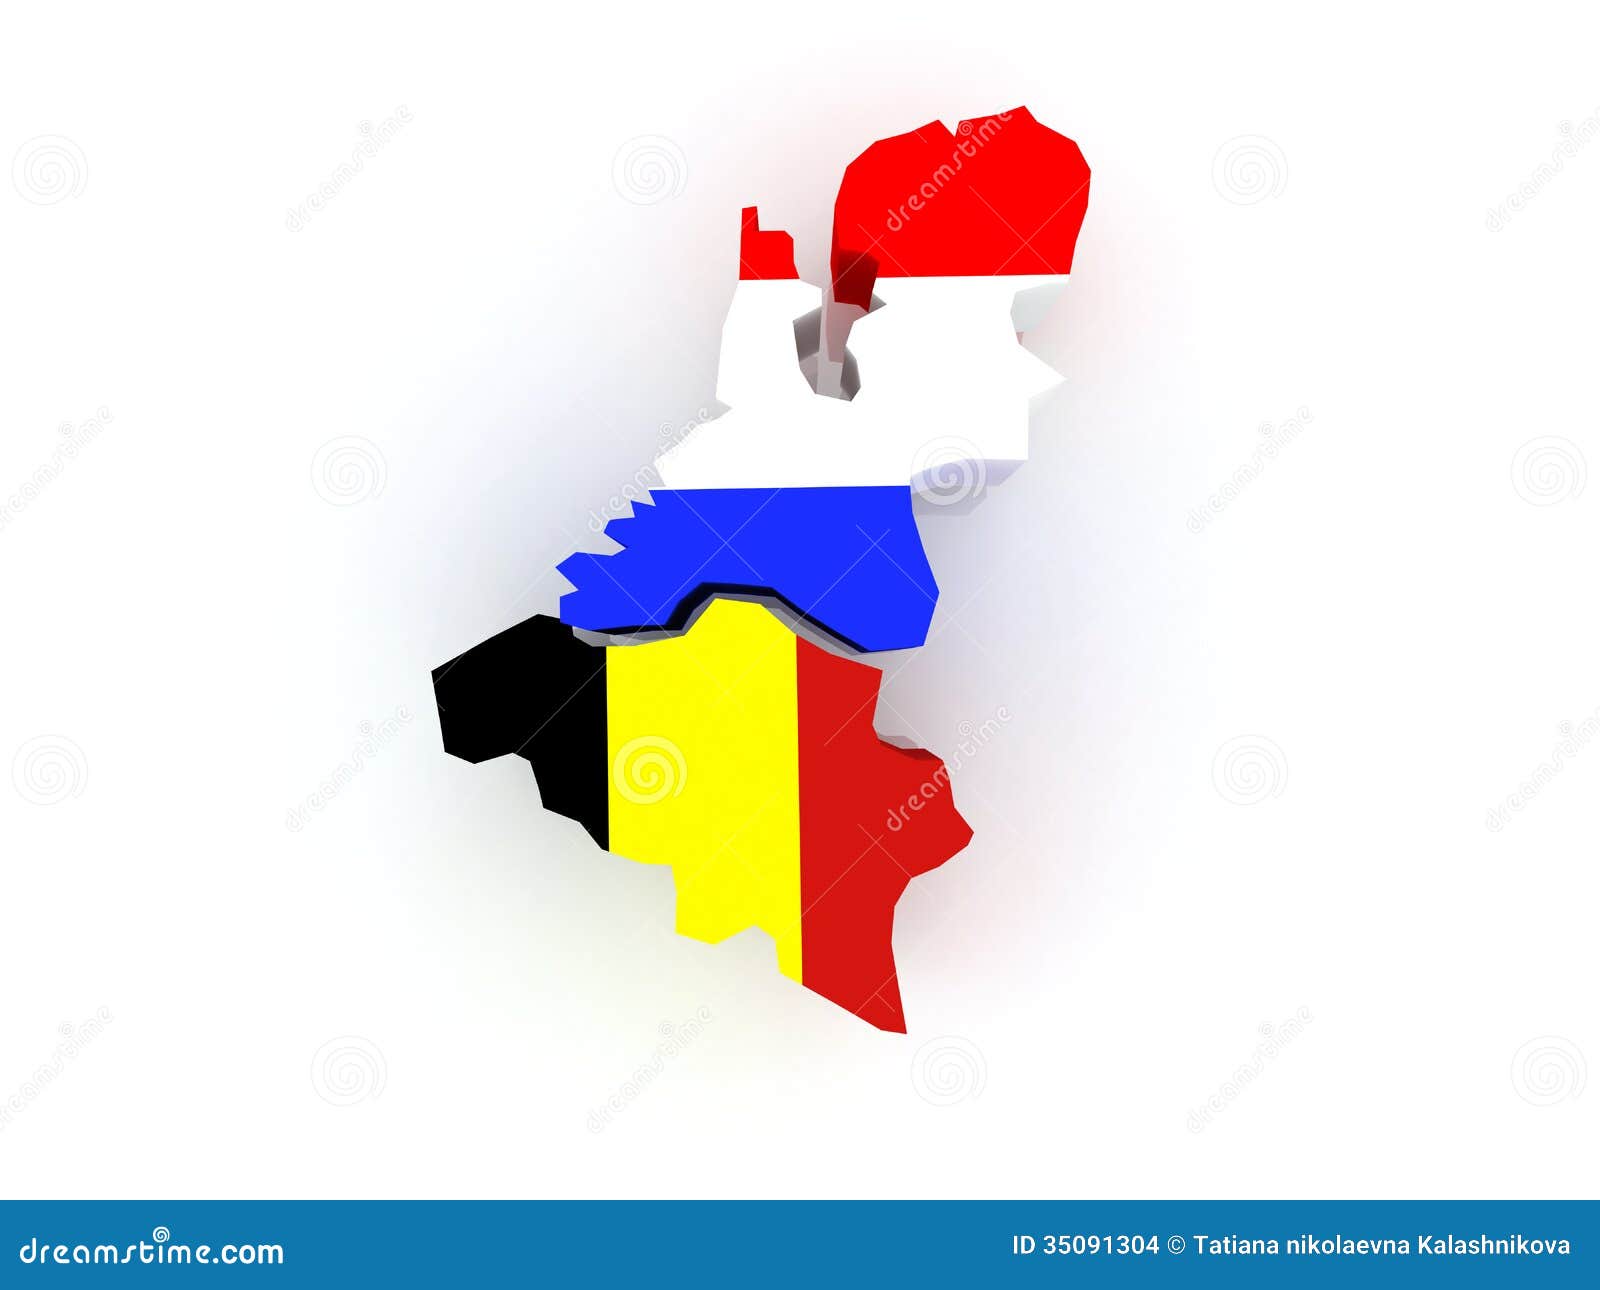 Map Of Belgium And The Netherlands. Royalty-Free Stock Image ...